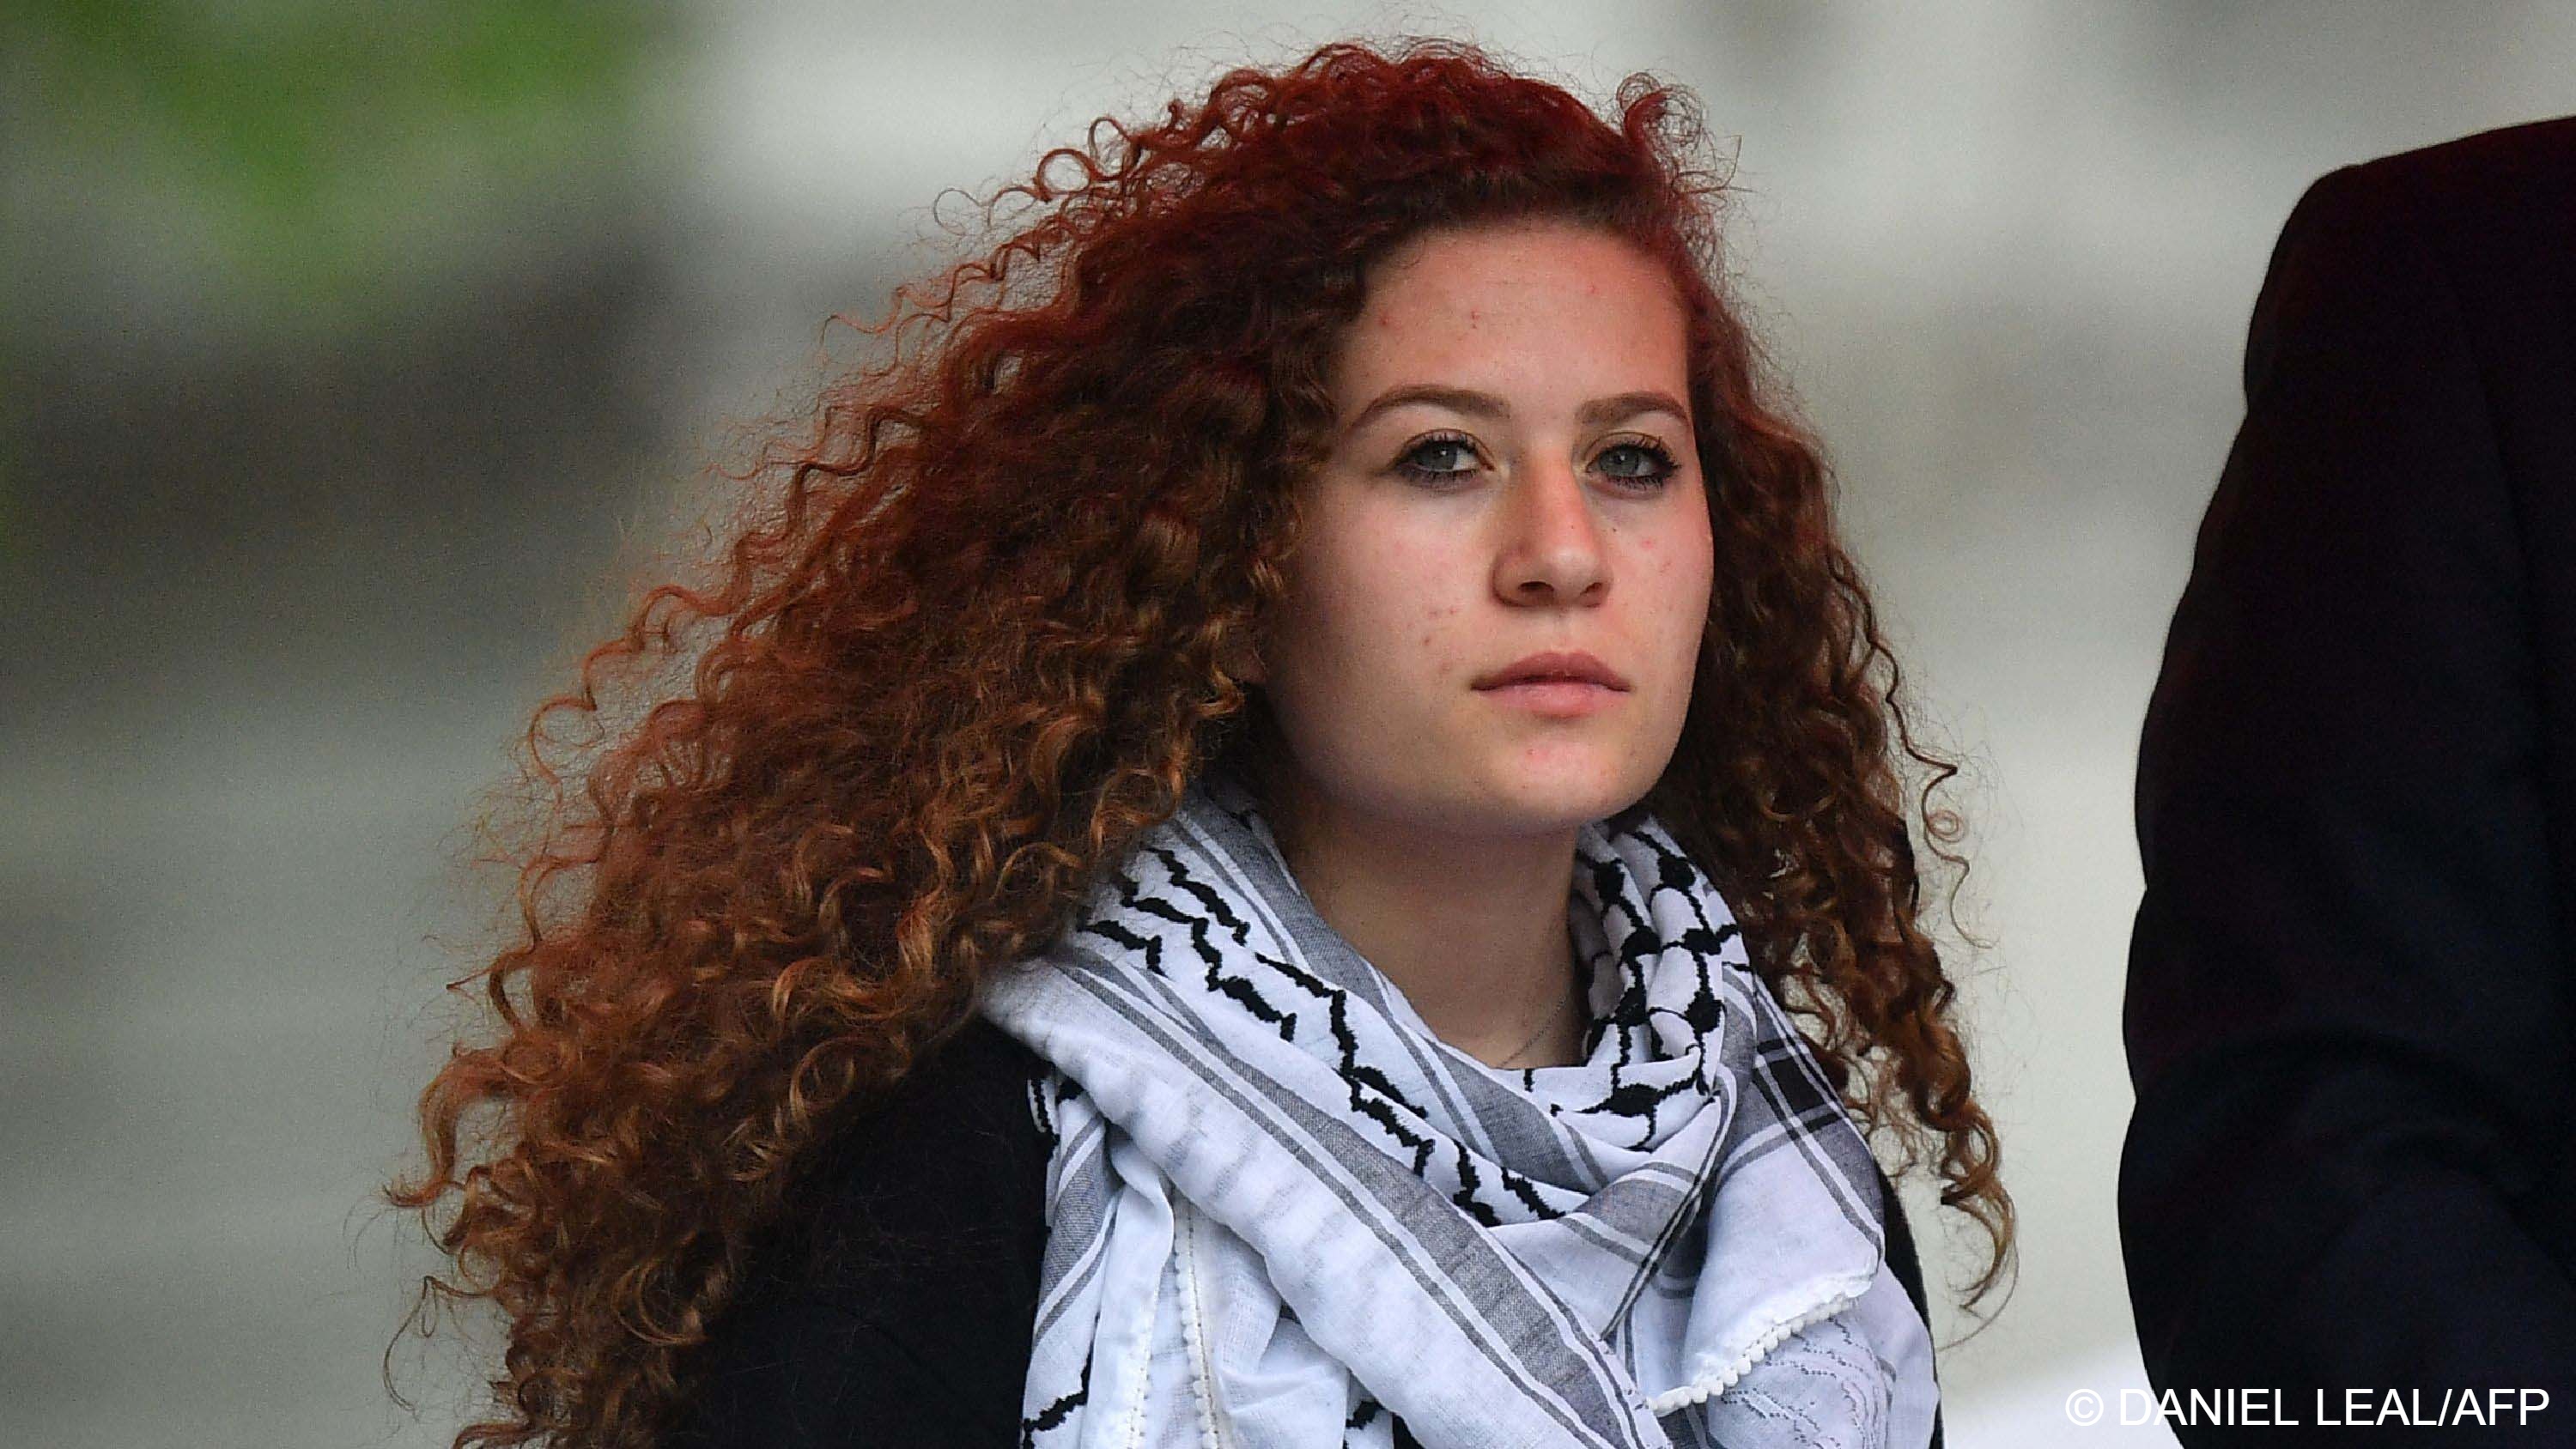 Portrait of a young woman with long curly brown hair wearing a Palestinian keffiyeh scarf